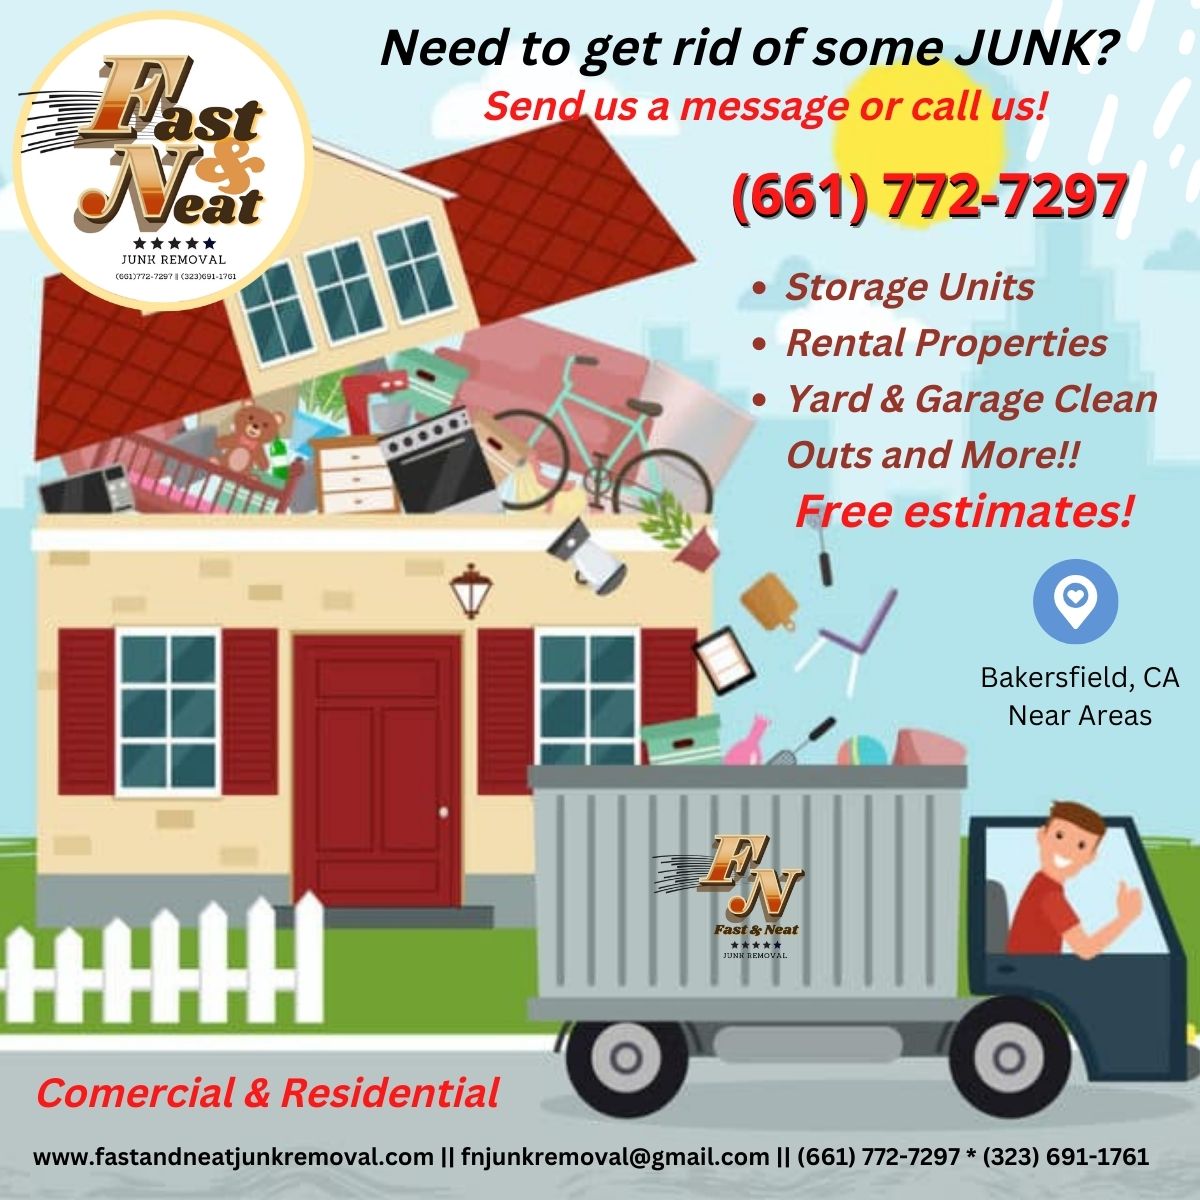 Want to get rid of some JUNK Fast and Neat junk removal